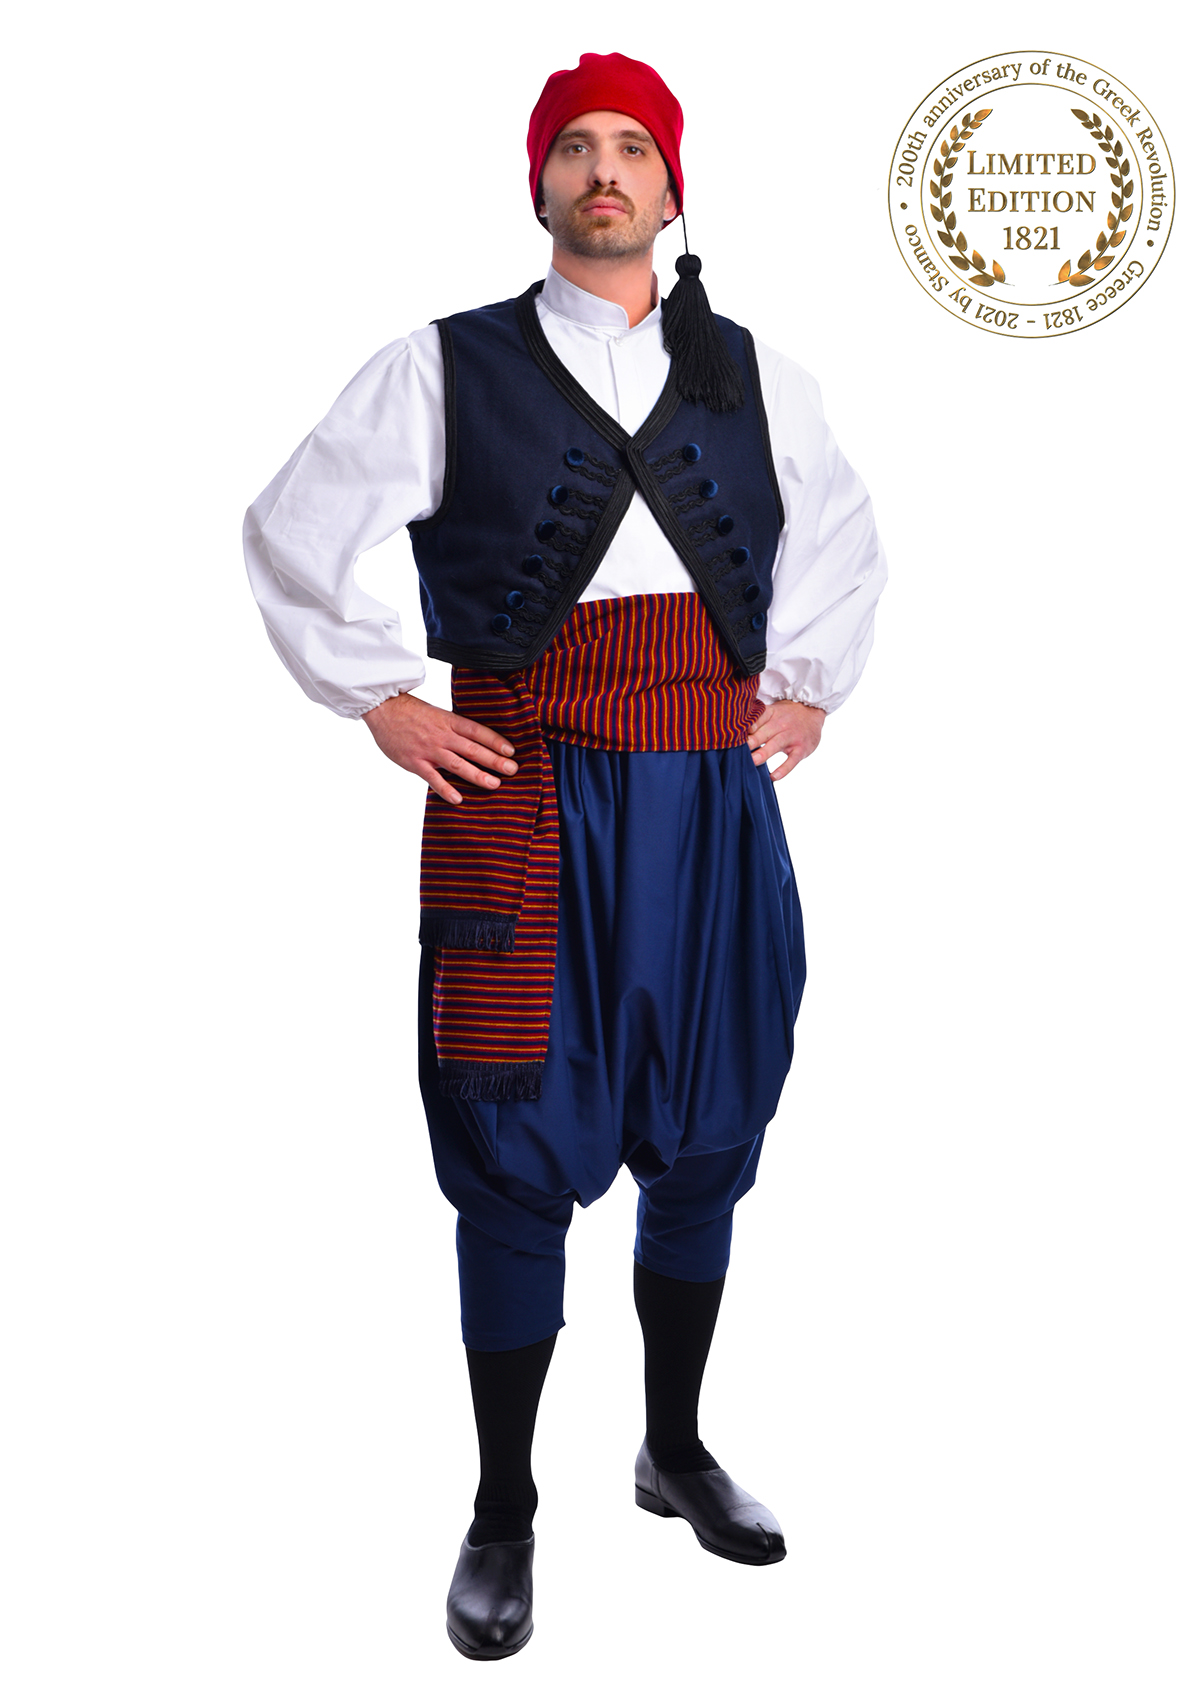 traditional greek costumes